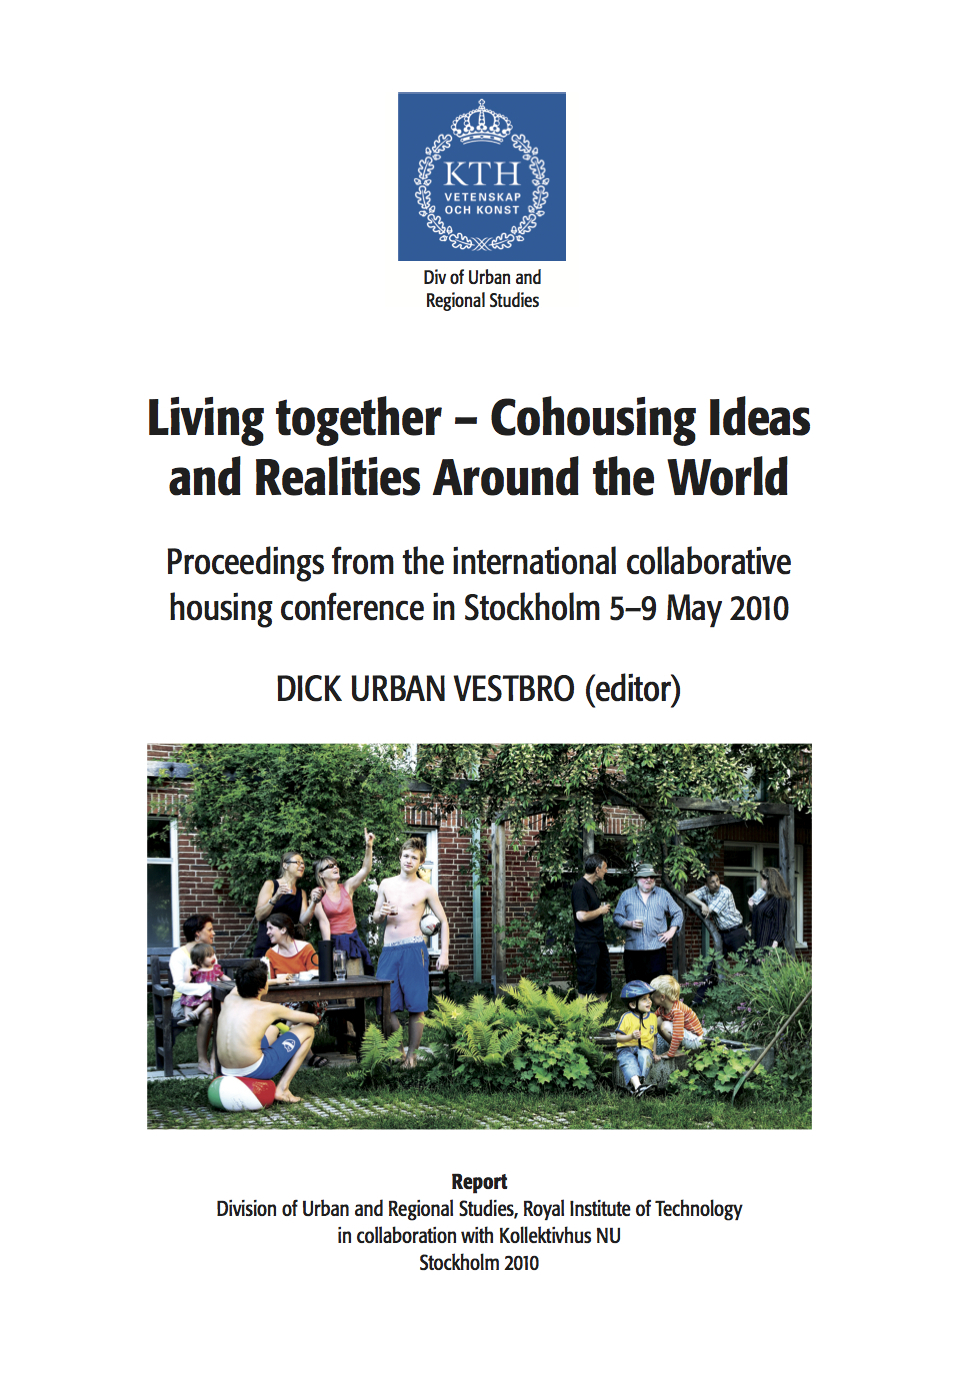 2010 International Conference about Collaborative Housing in Stockholm – the Proceedings ”Living together – Cohousing Ideas and Realities Around the World” for downloading.